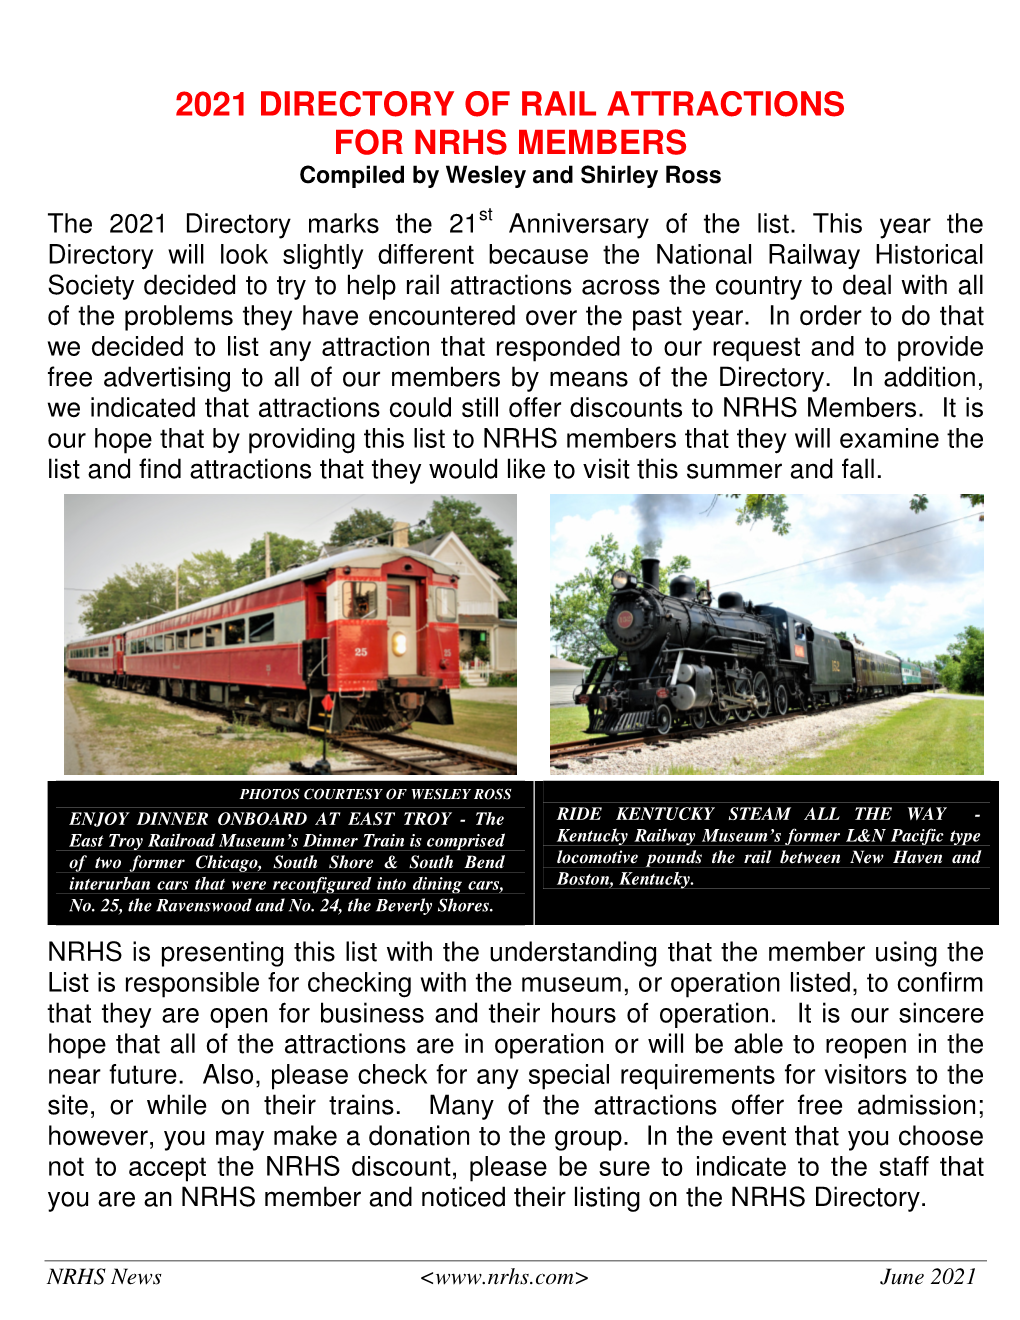 2021 DIRECTORY of RAIL ATTRACTIONS for NRHS MEMBERS Compiled by Wesley and Shirley Ross the 2021 Directory Marks the 21 St Anniversary of the List